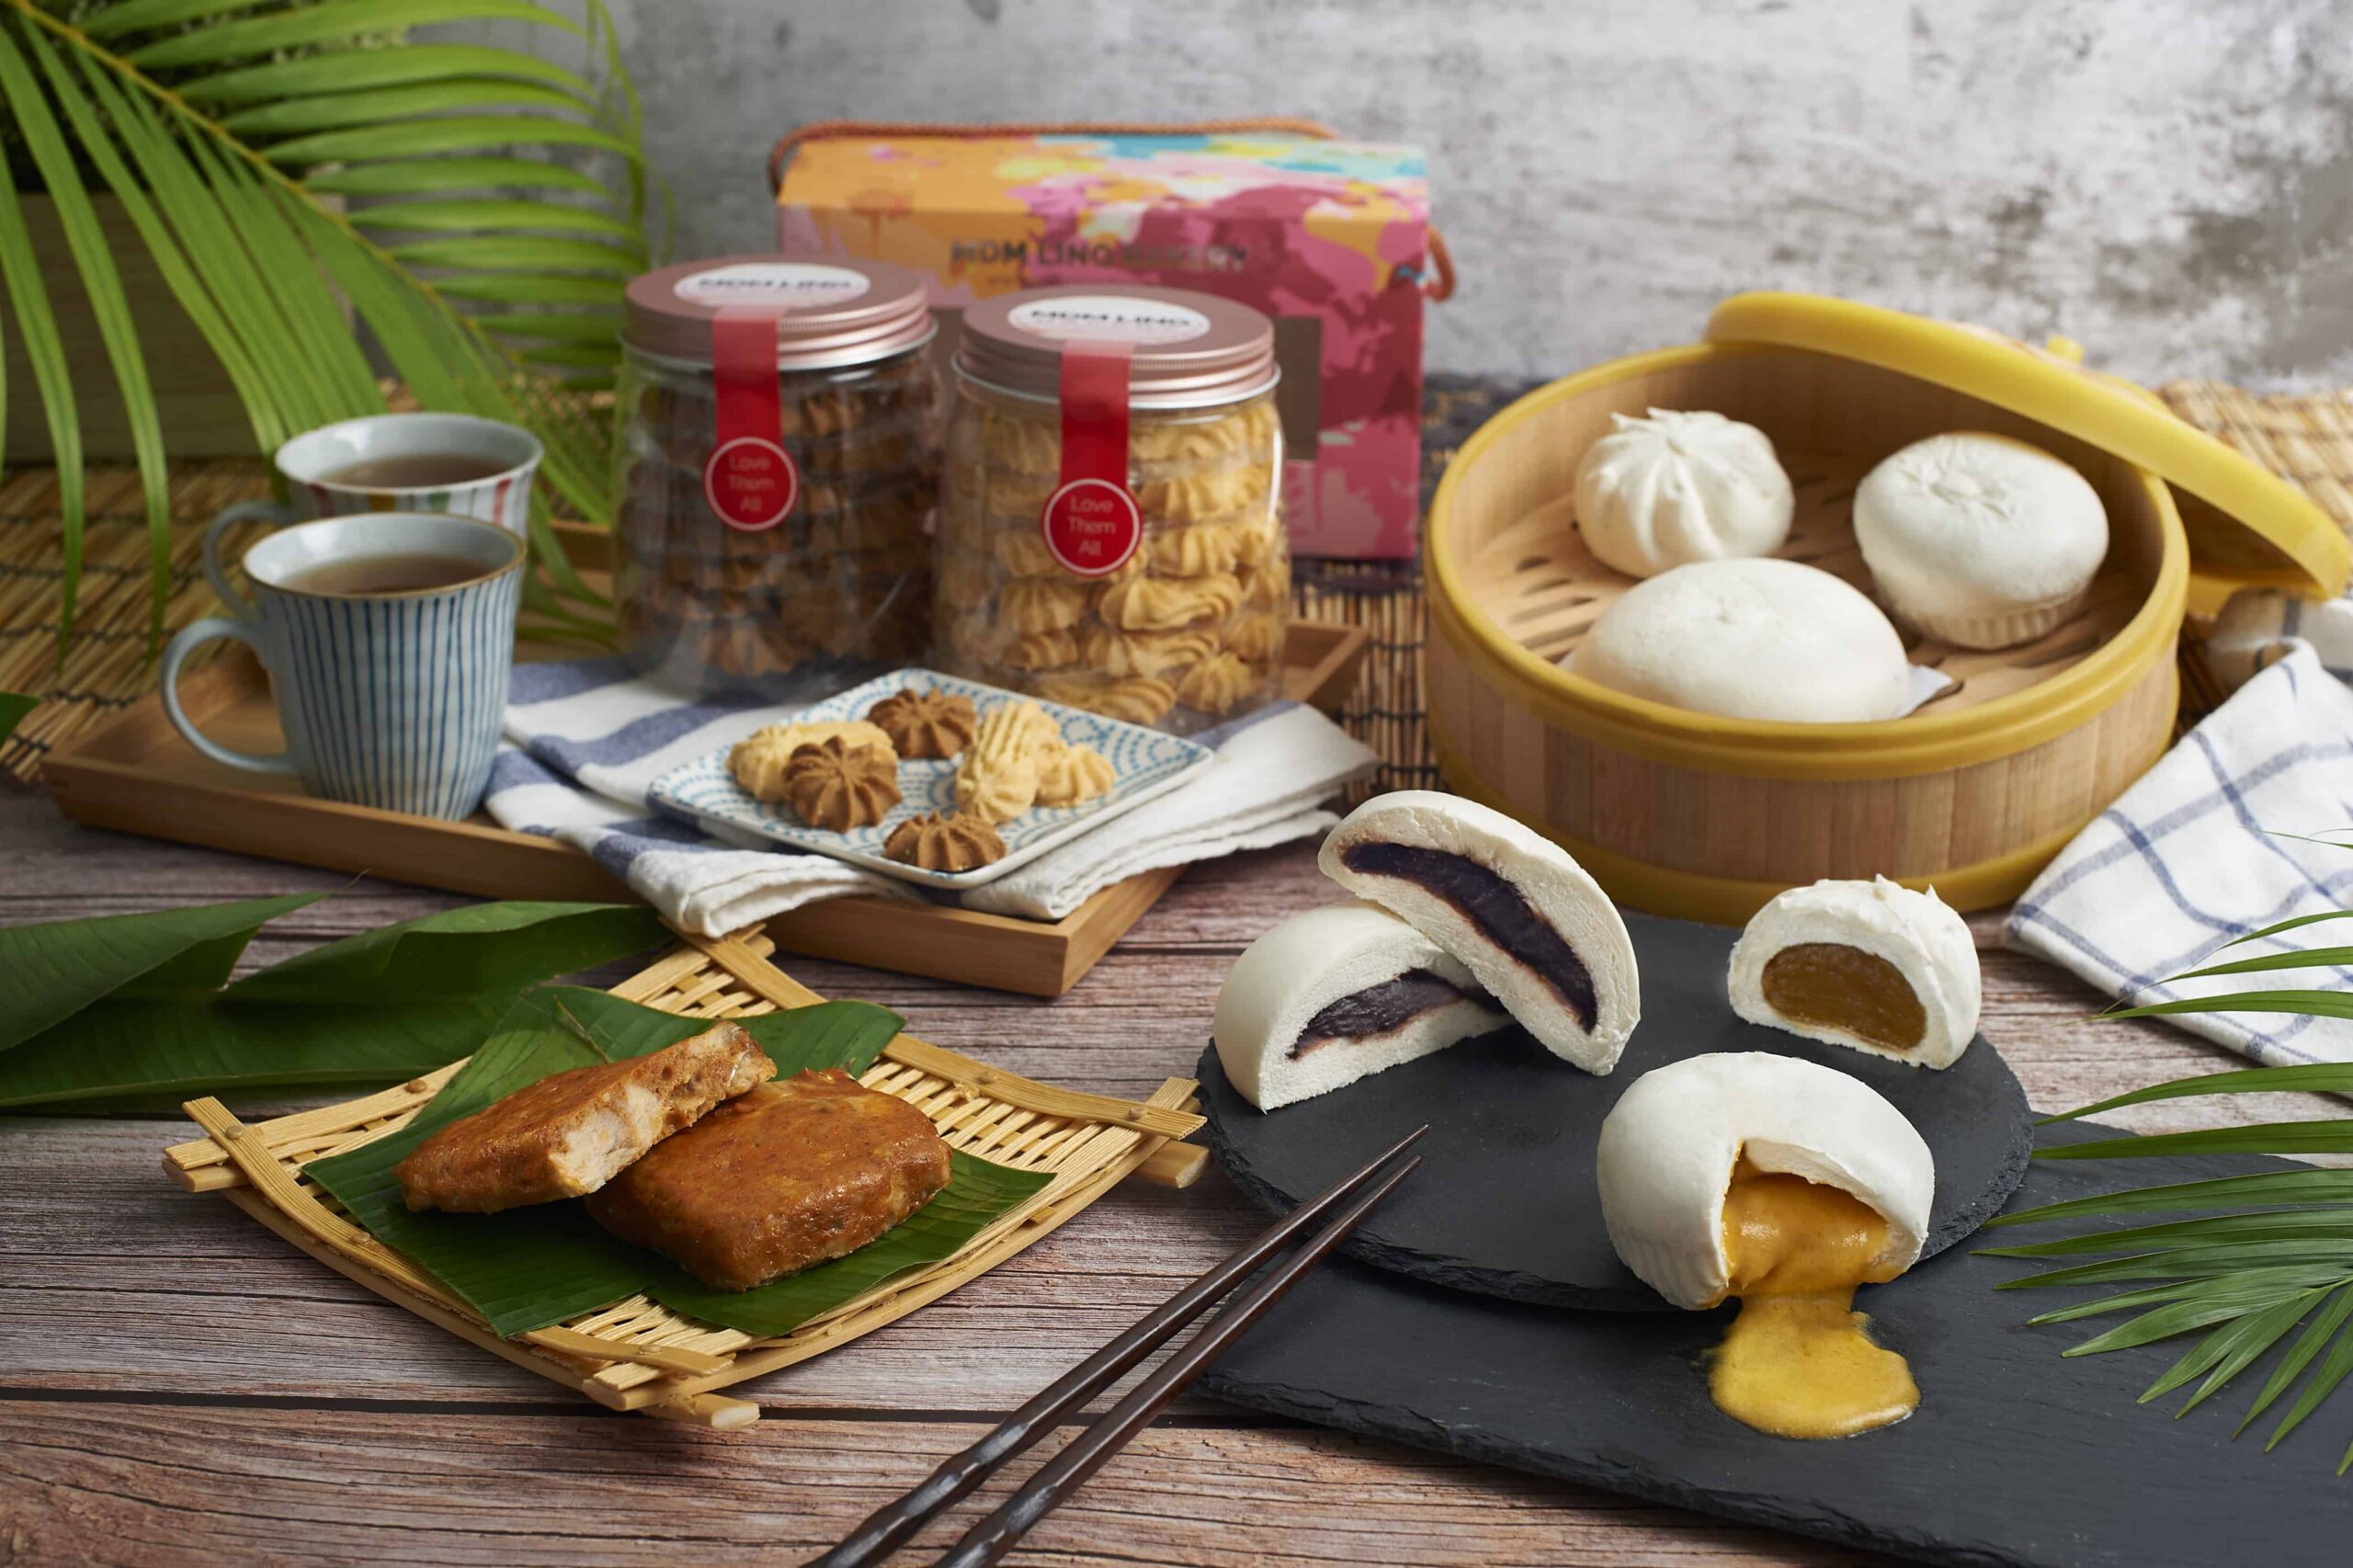 CNY Cookies and Steamed Buns